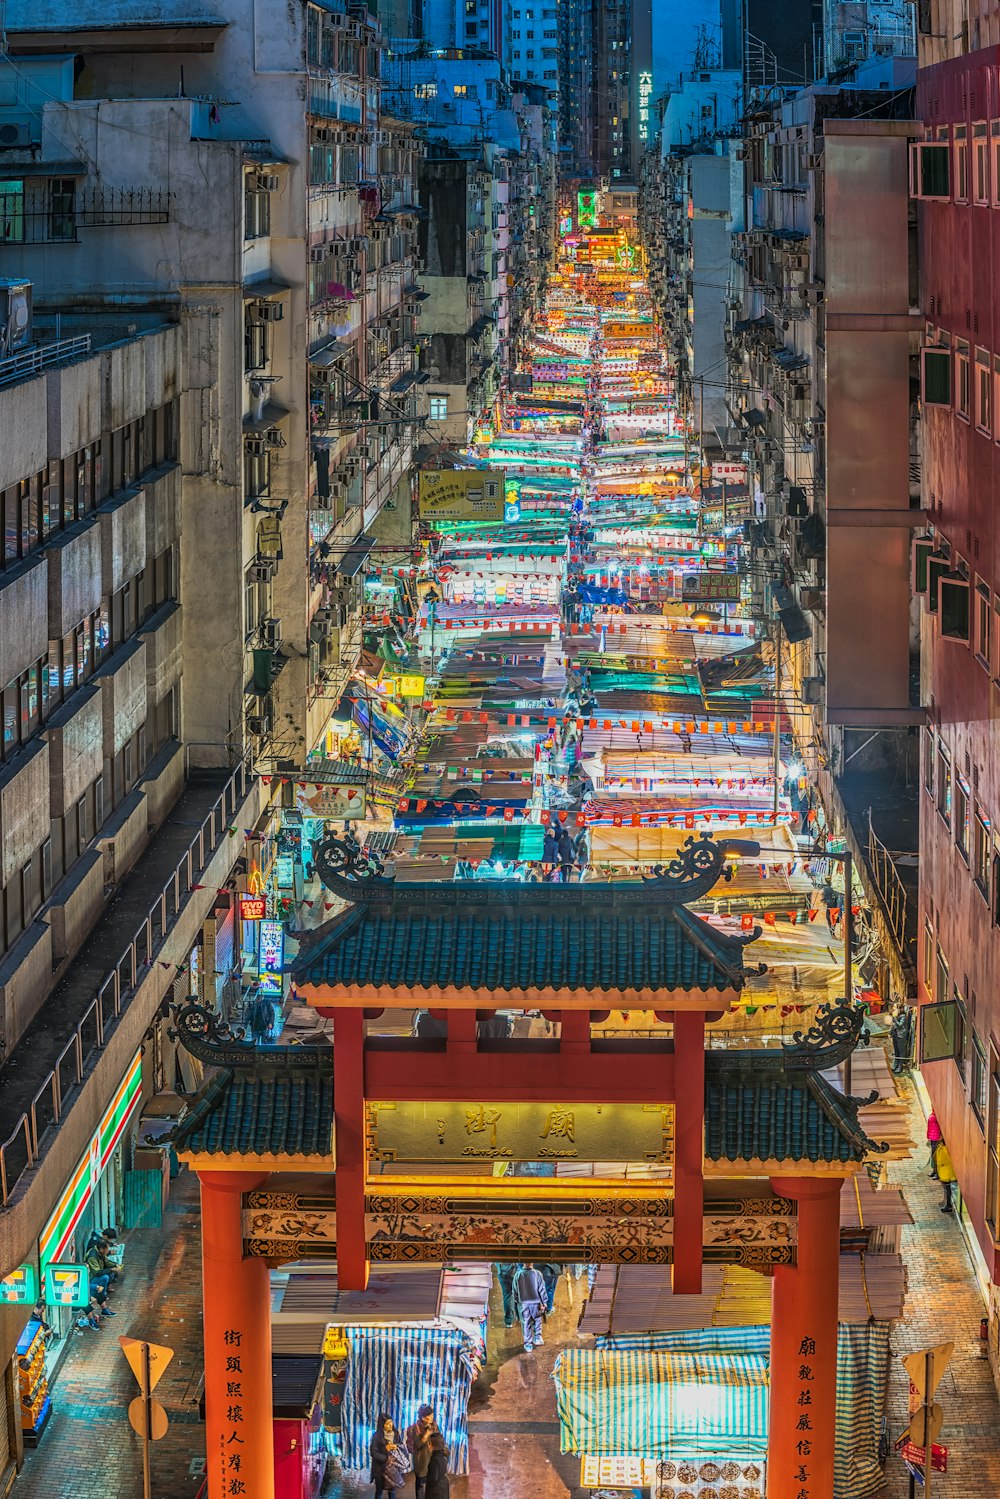 night market in the middle of houses